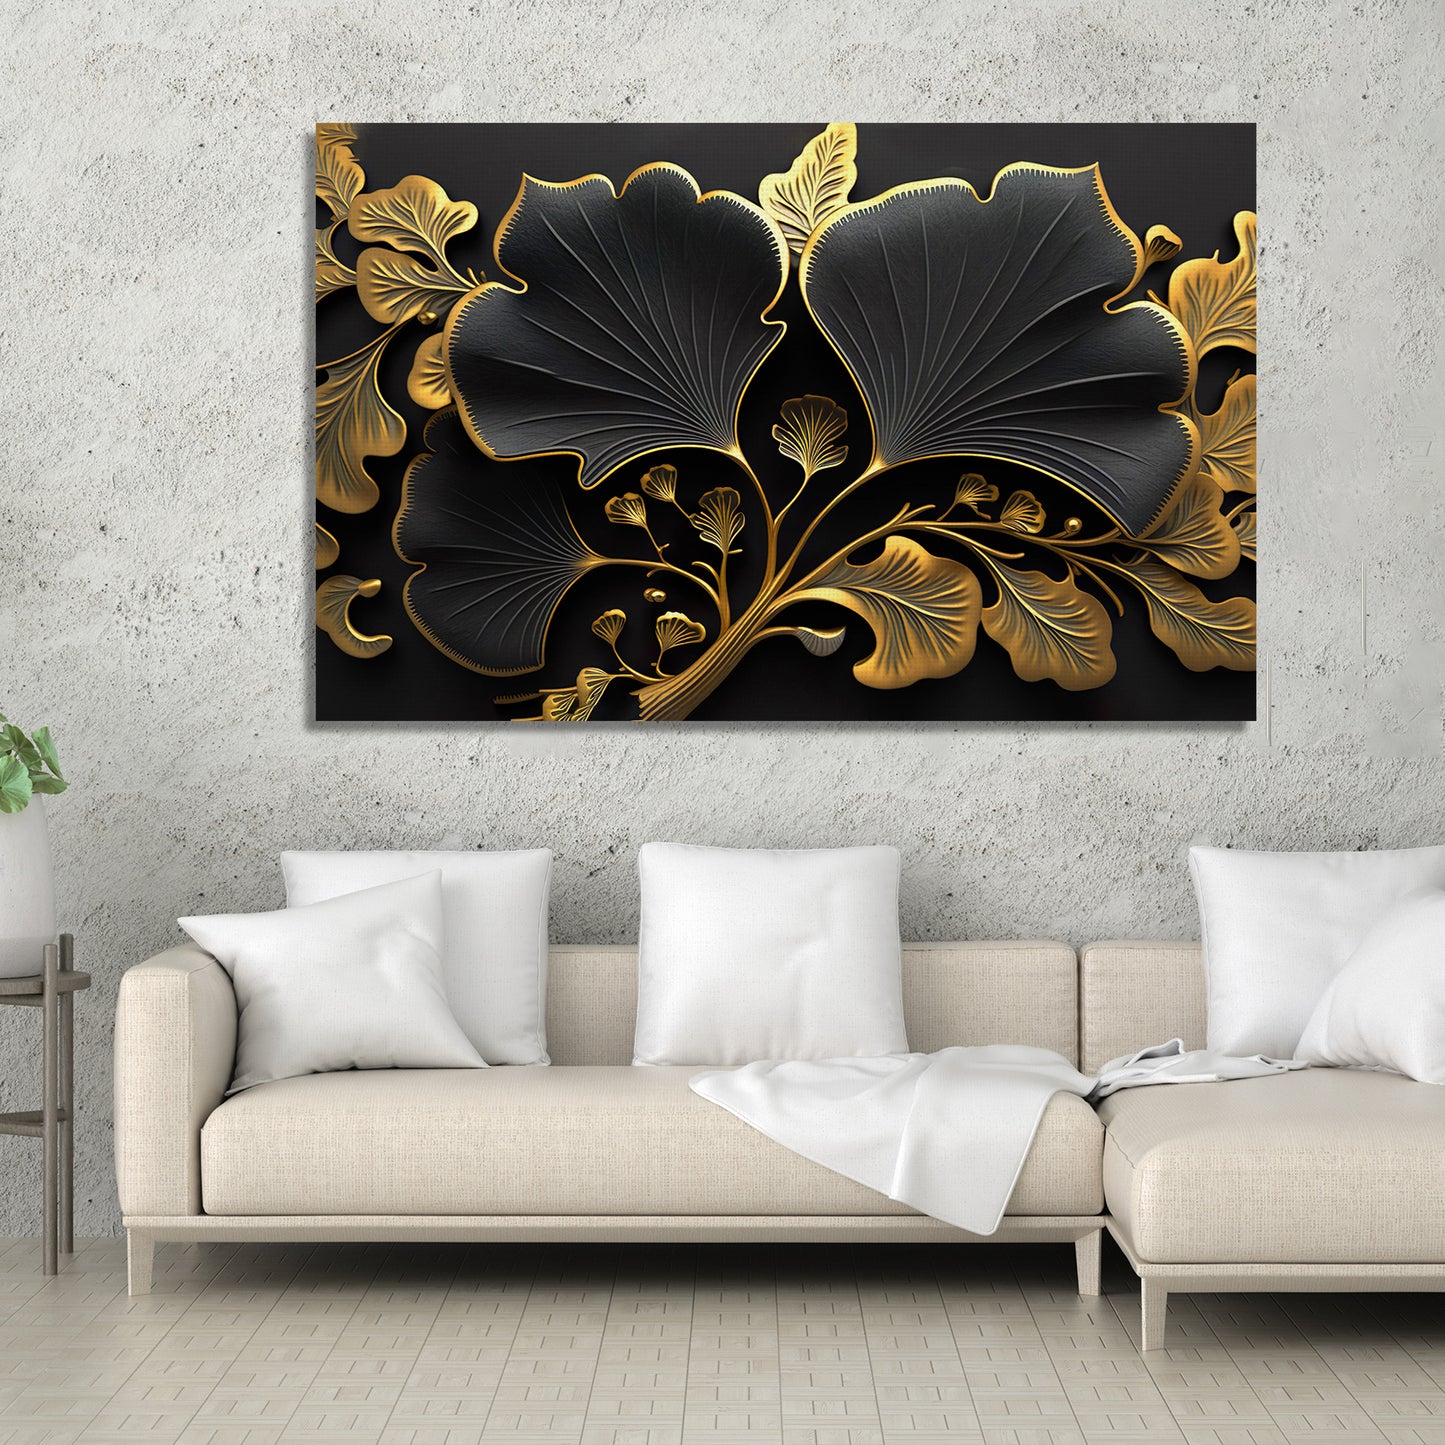 Luxury Black and Golden Flower Canvas Painting for Living Room Bedroom Home Wall Decor